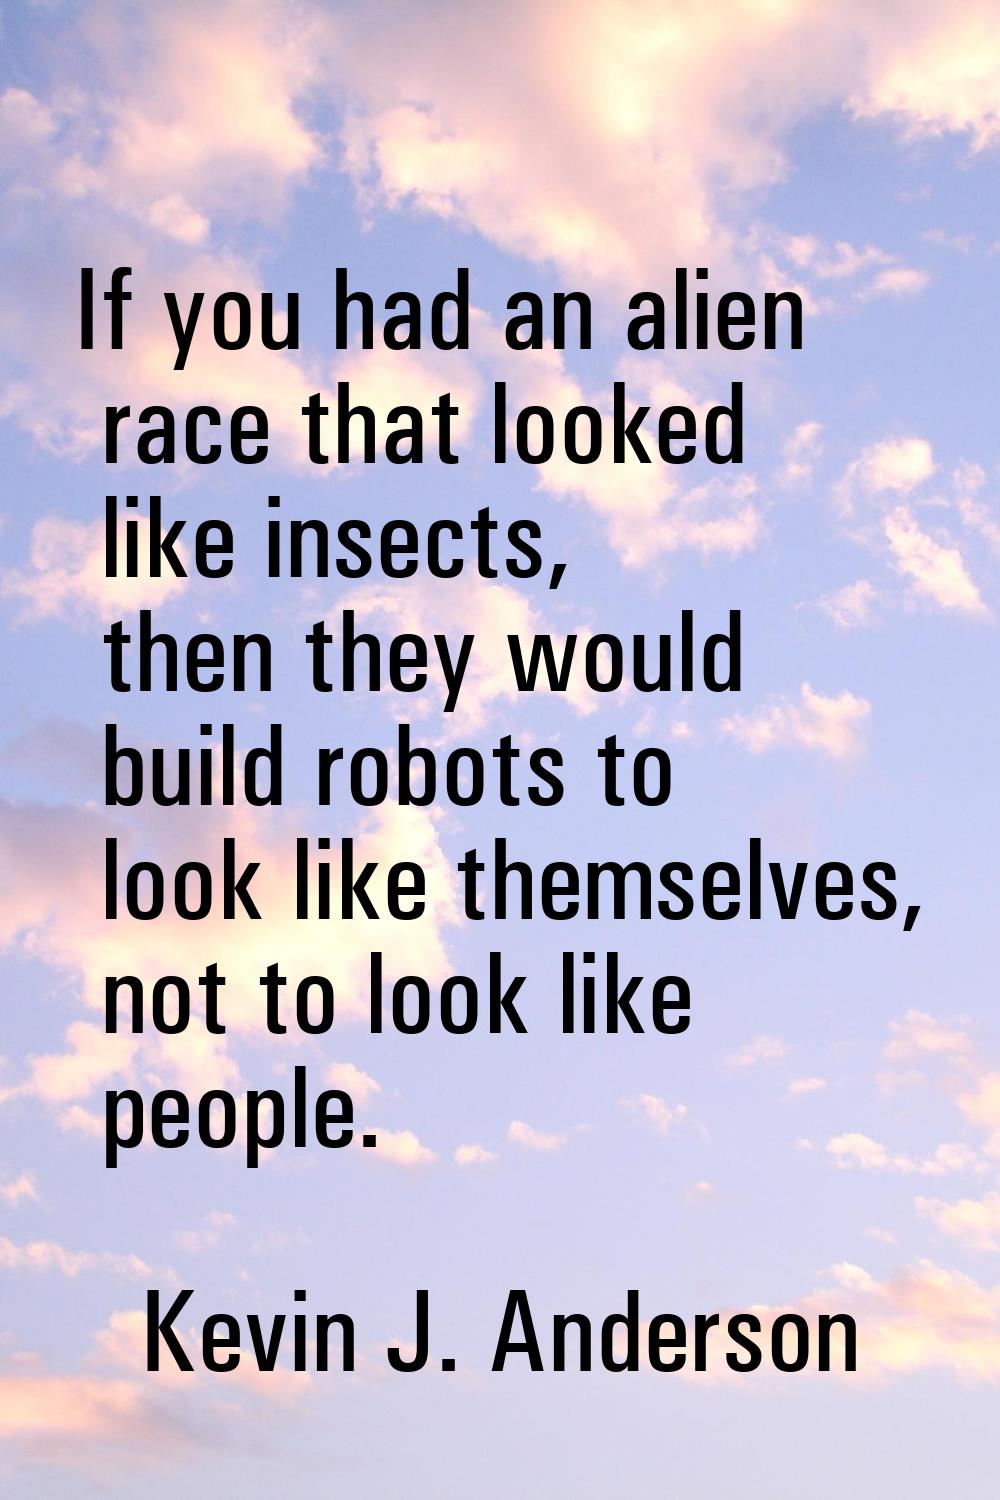 If you had an alien race that looked like insects, then they would build robots to look like themse